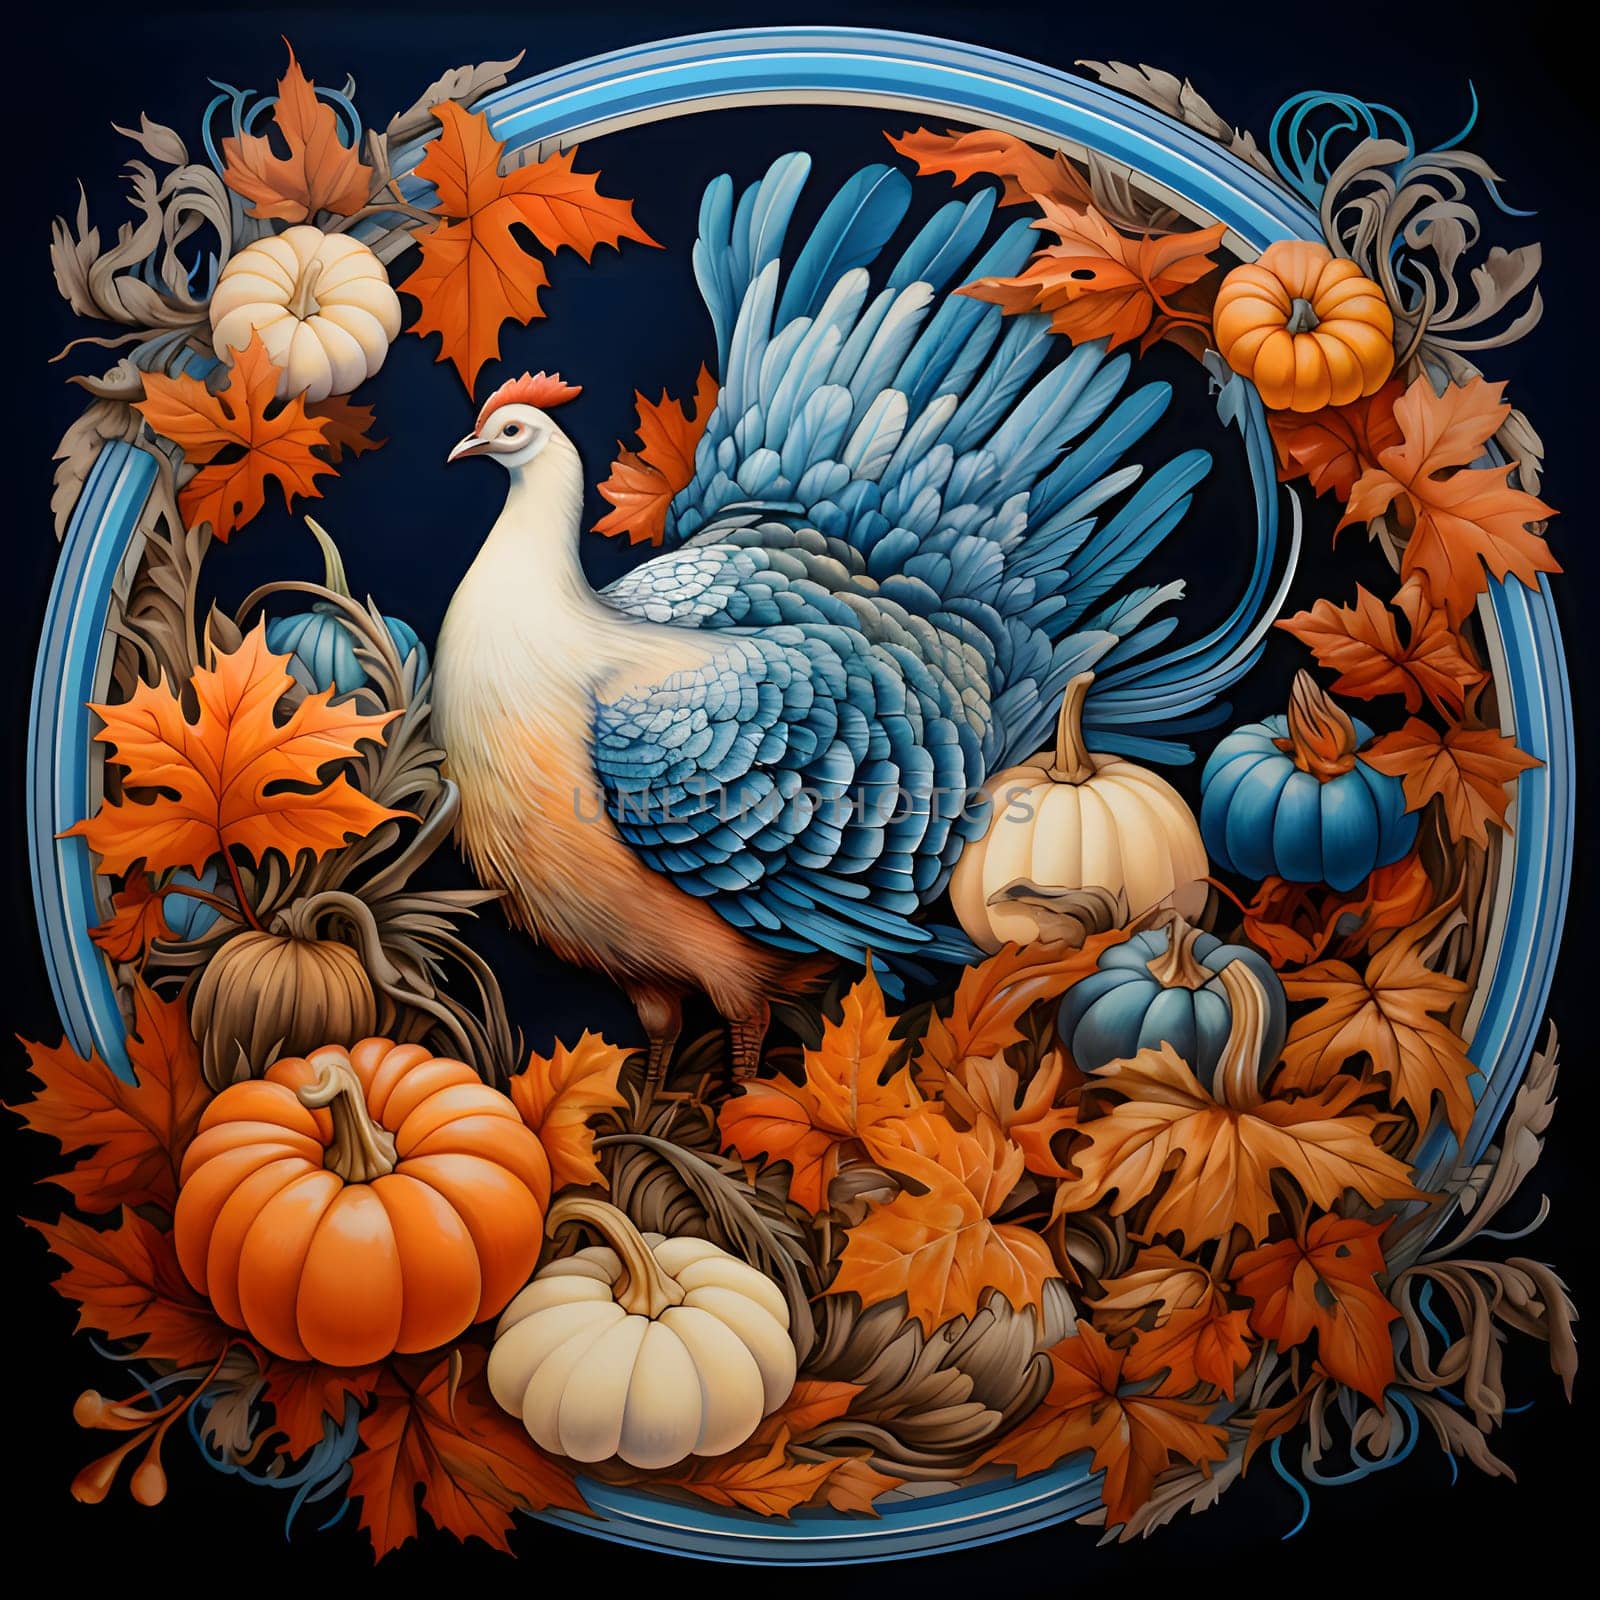 Image of turkey, hen in a circle decorated with days and Leaves. Turkey as the main dish of thanksgiving for the harvest. An atmosphere of joy and celebration.